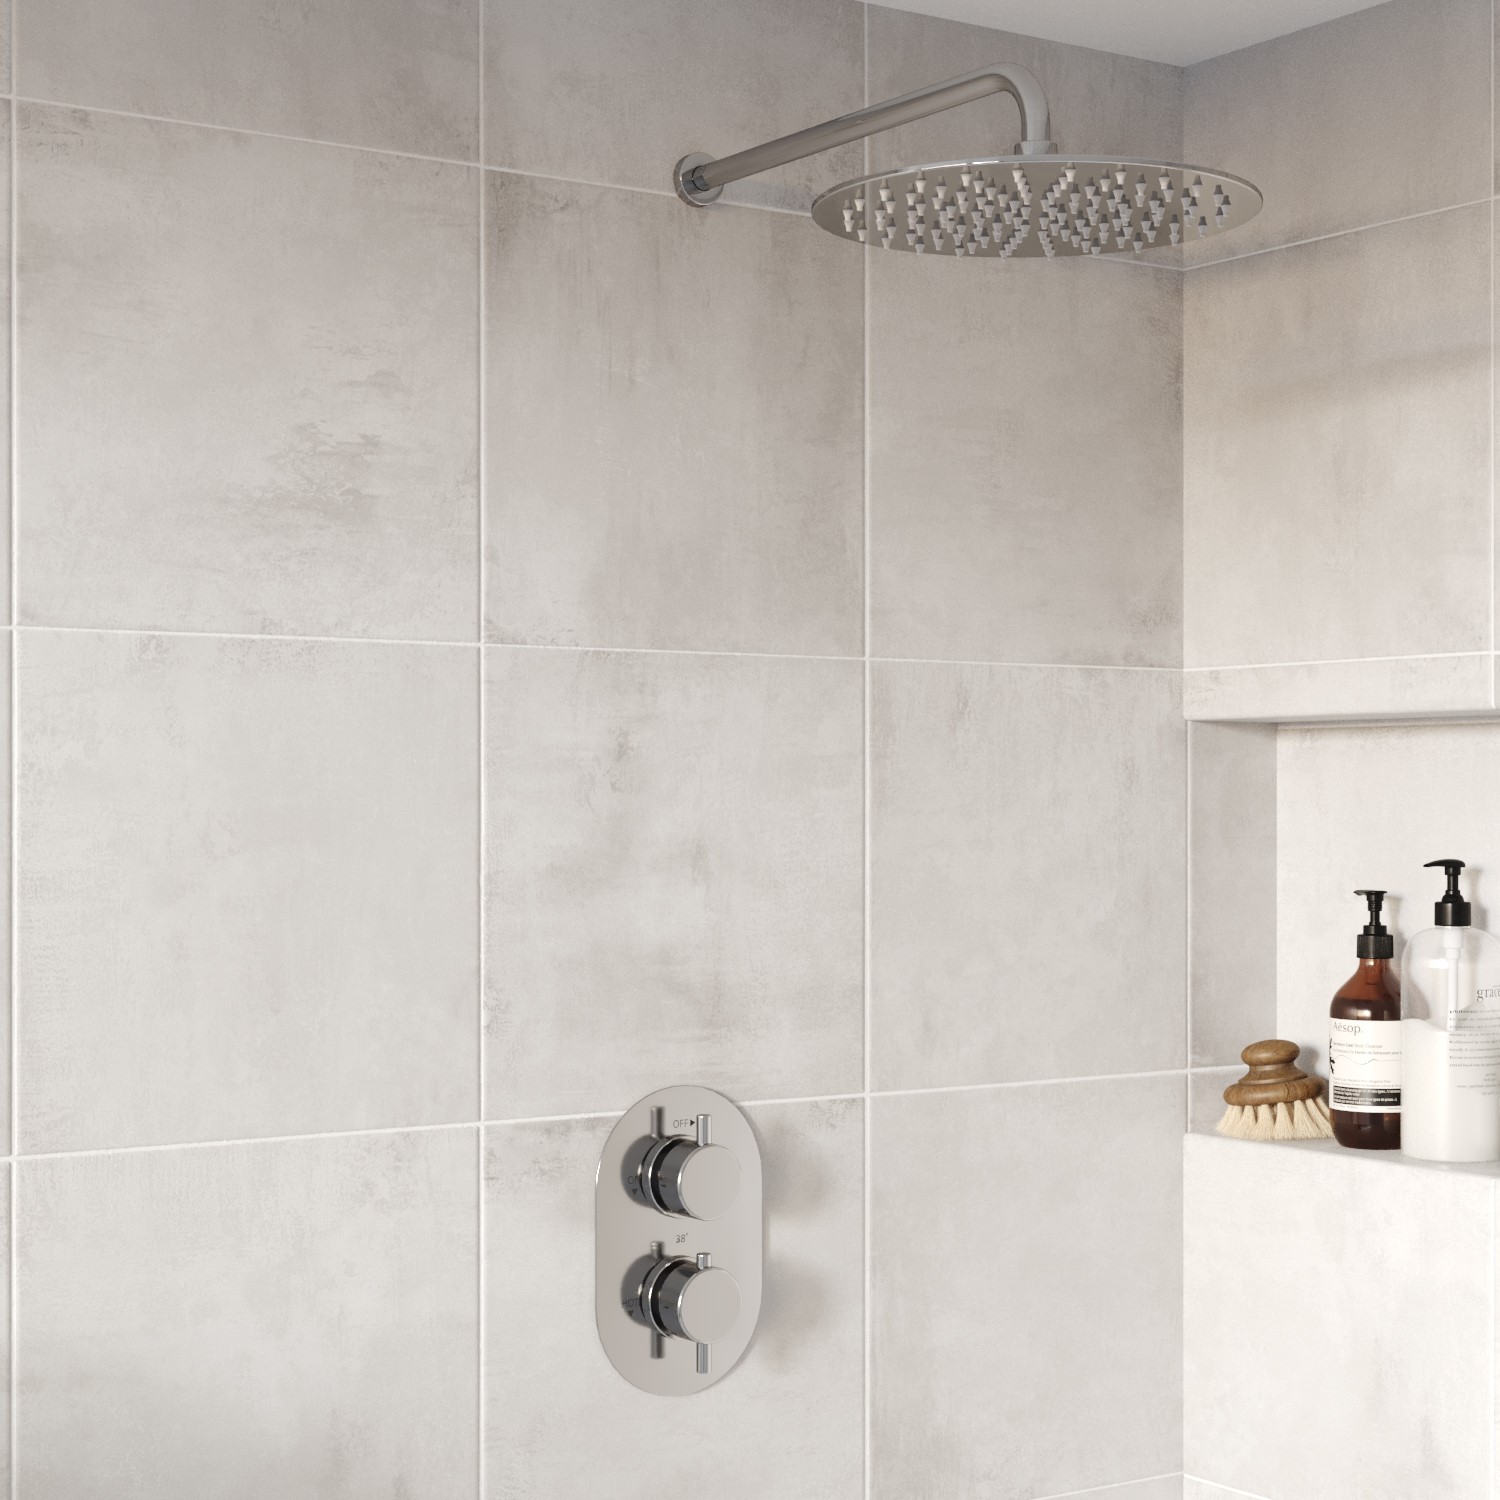 Concealed Thermostatic Mixer Shower with Wall Mounted Rainfall Shower Head - Flow